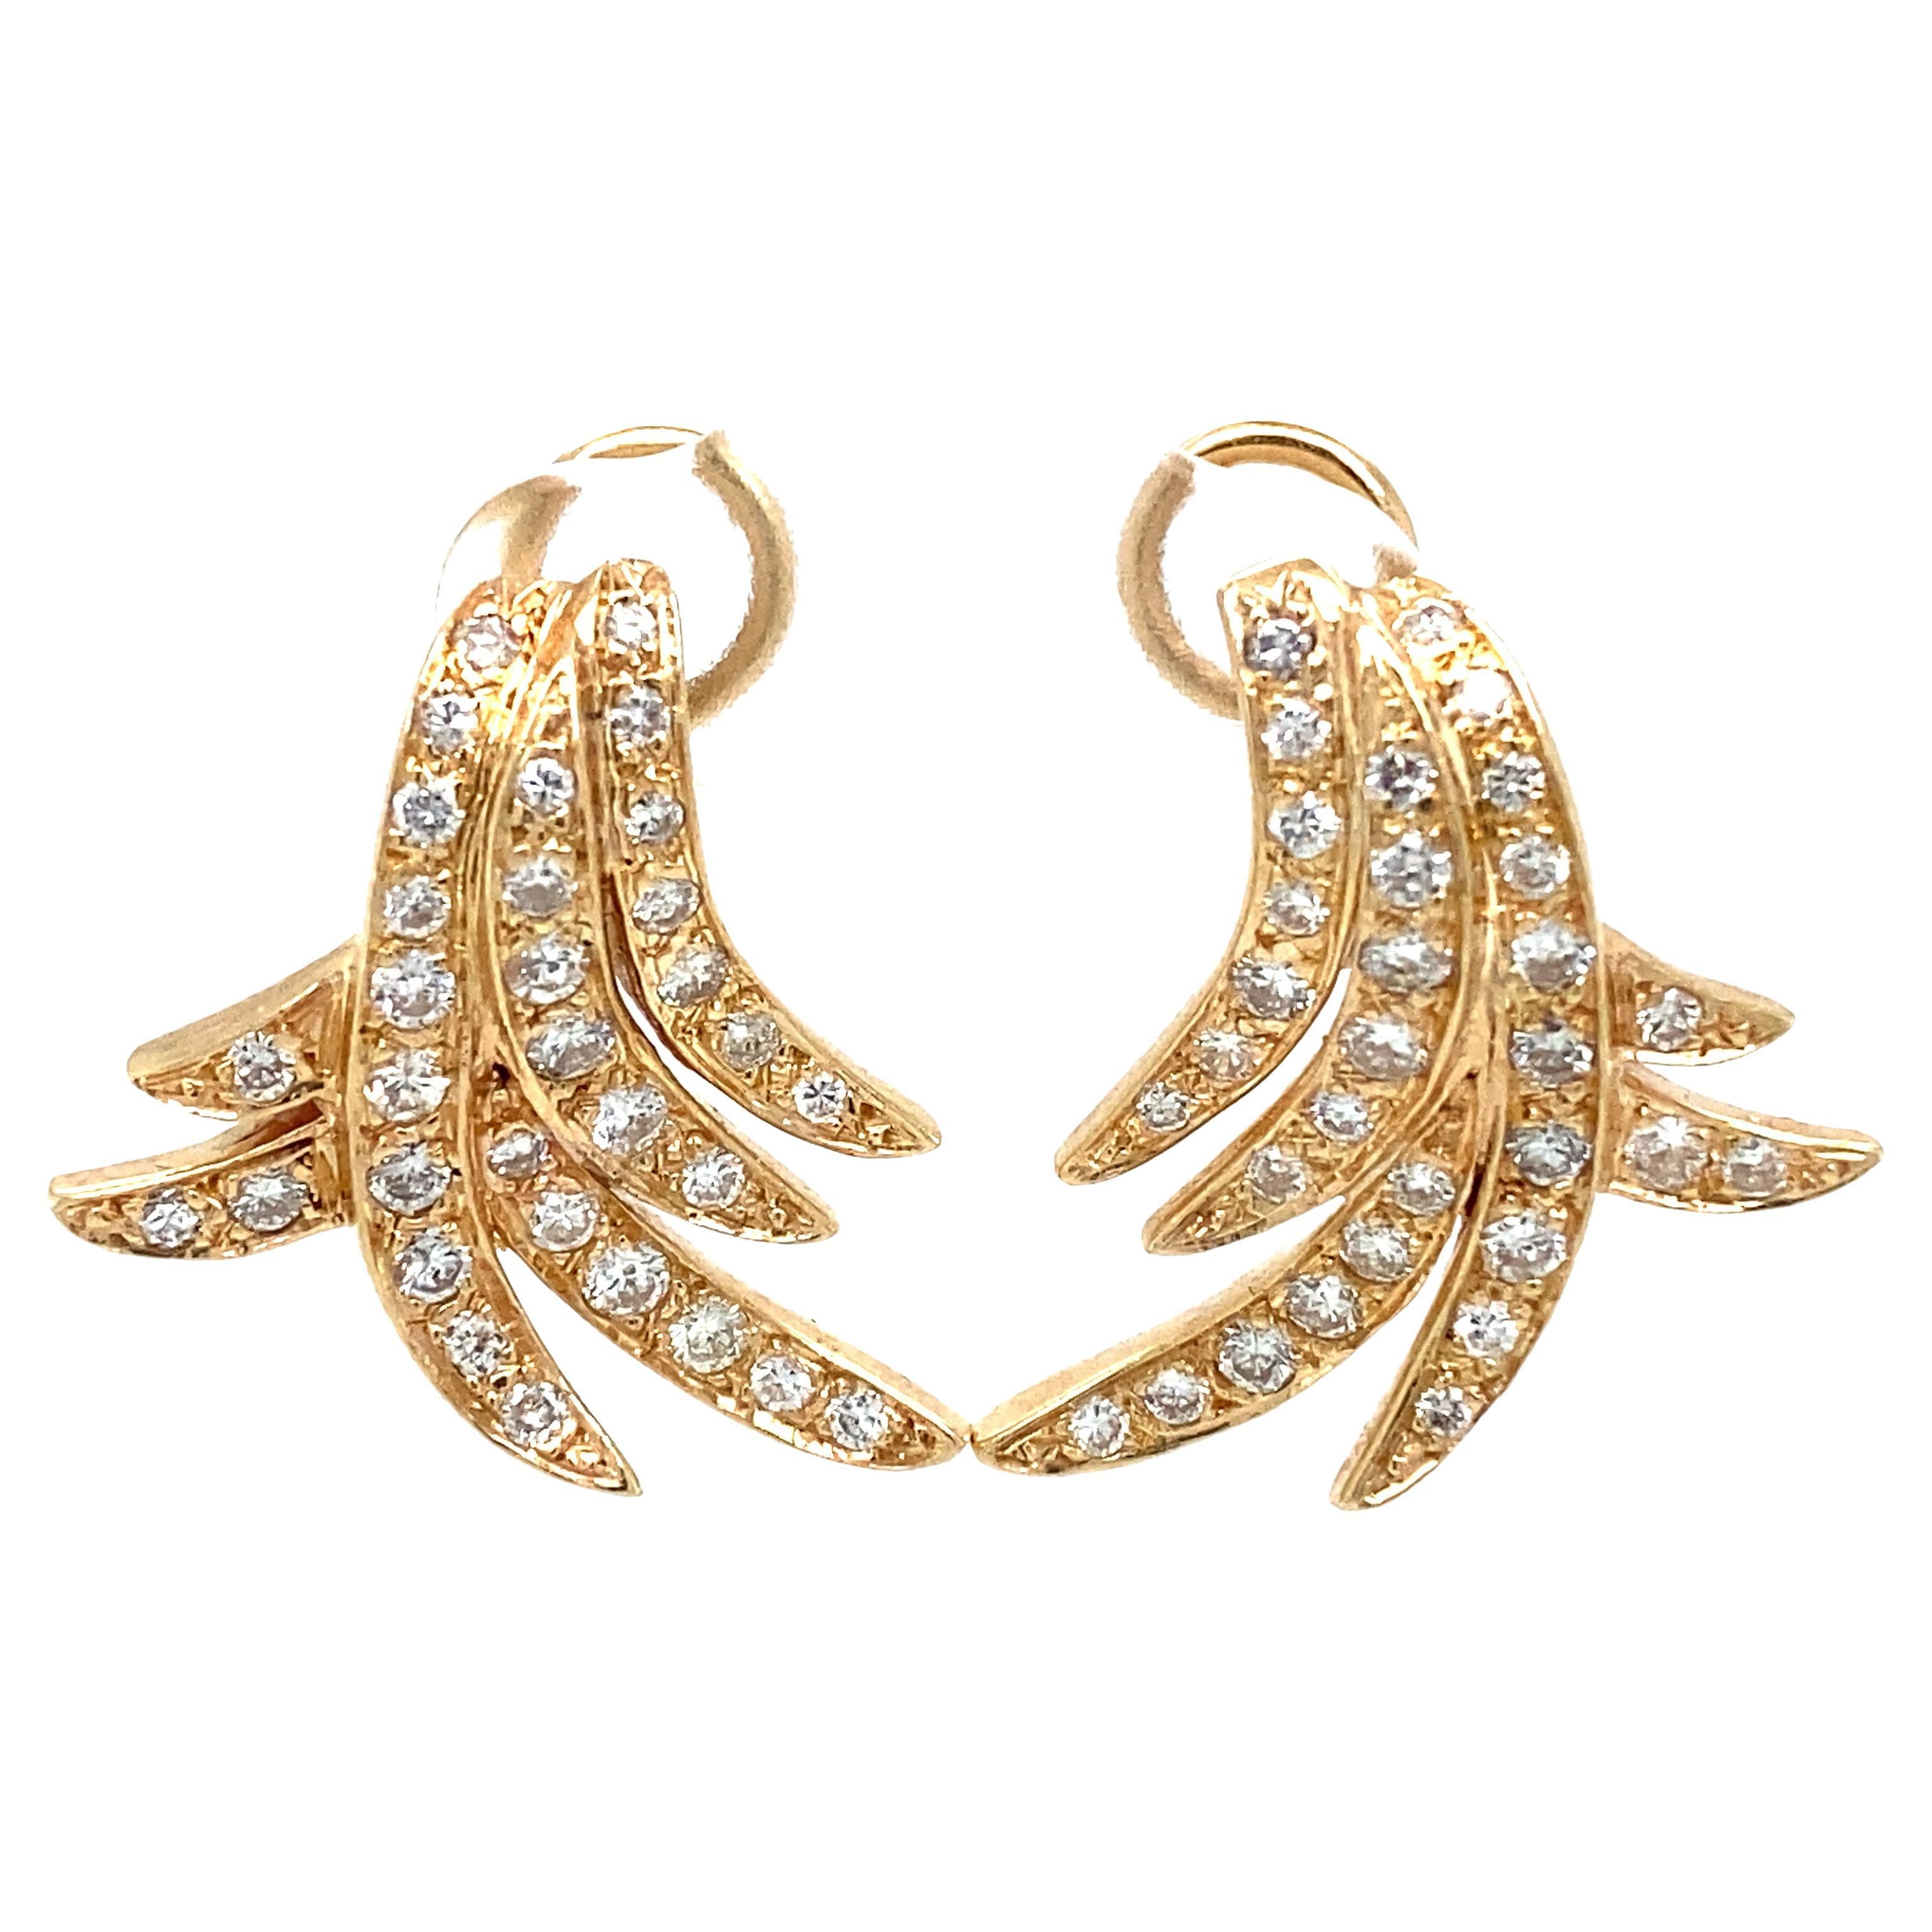 Enrique Pascual Diamond Feather Earrings in 14 Karat Yellow Gold For Sale